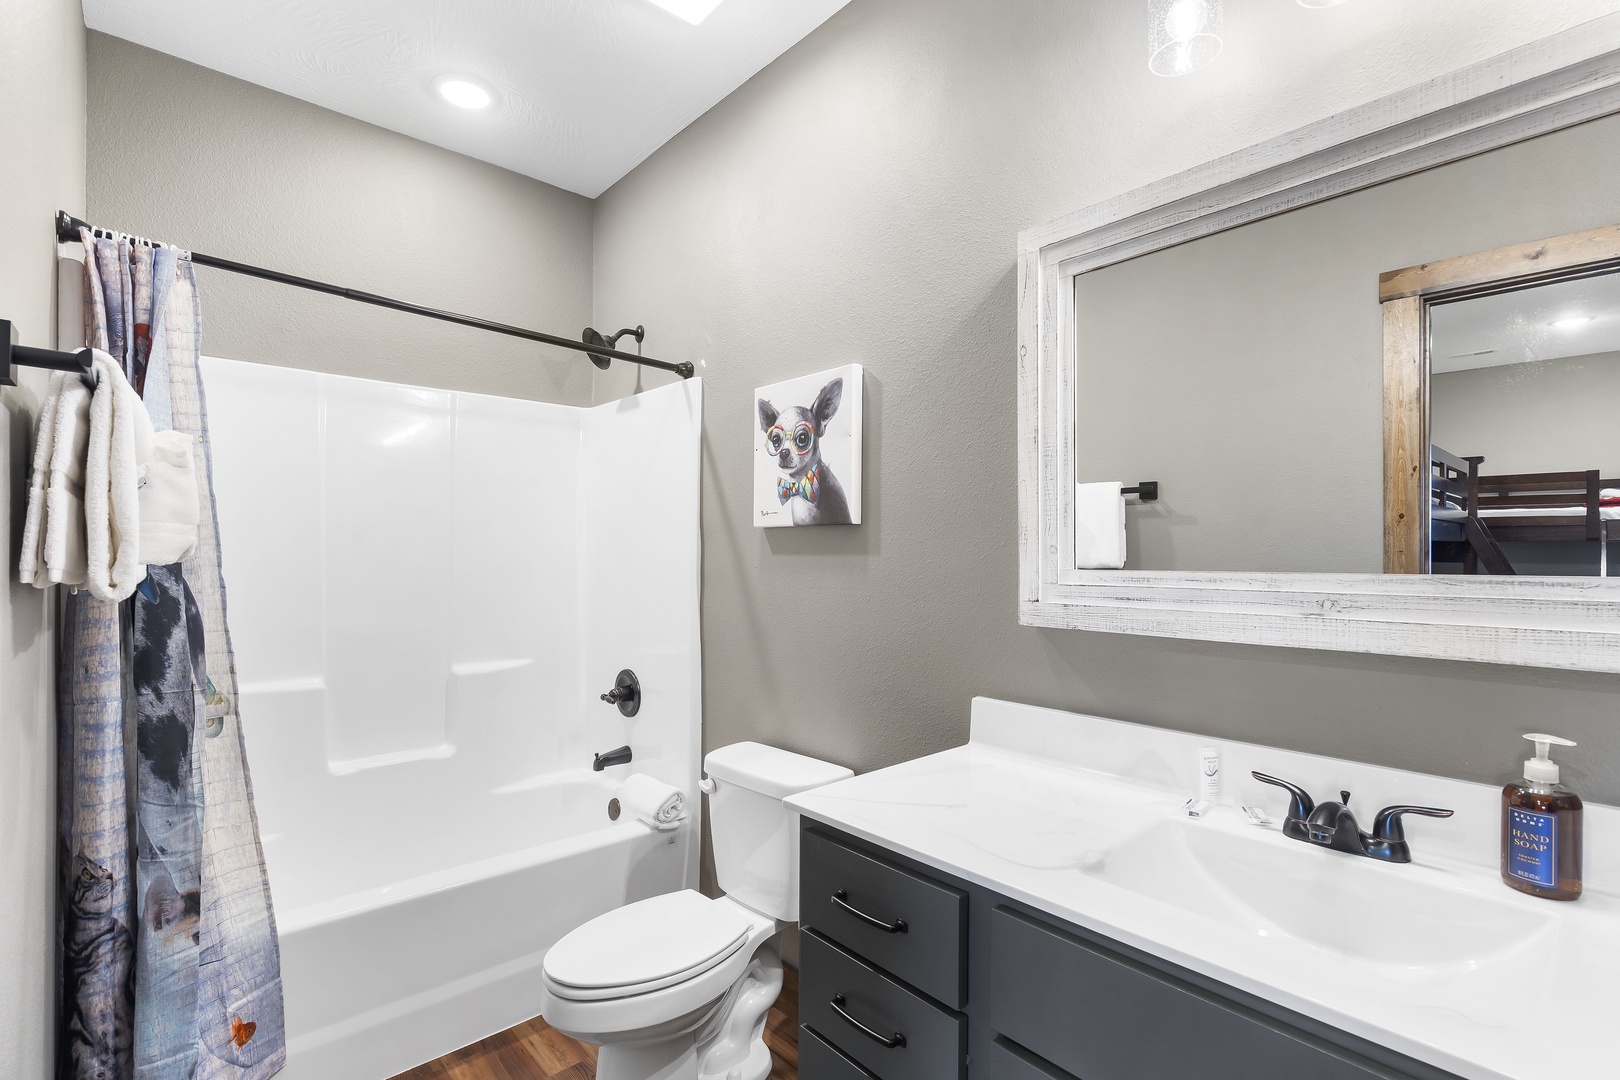 The fifth bedroom’s ensuite includes a single vanity & shower/tub combo